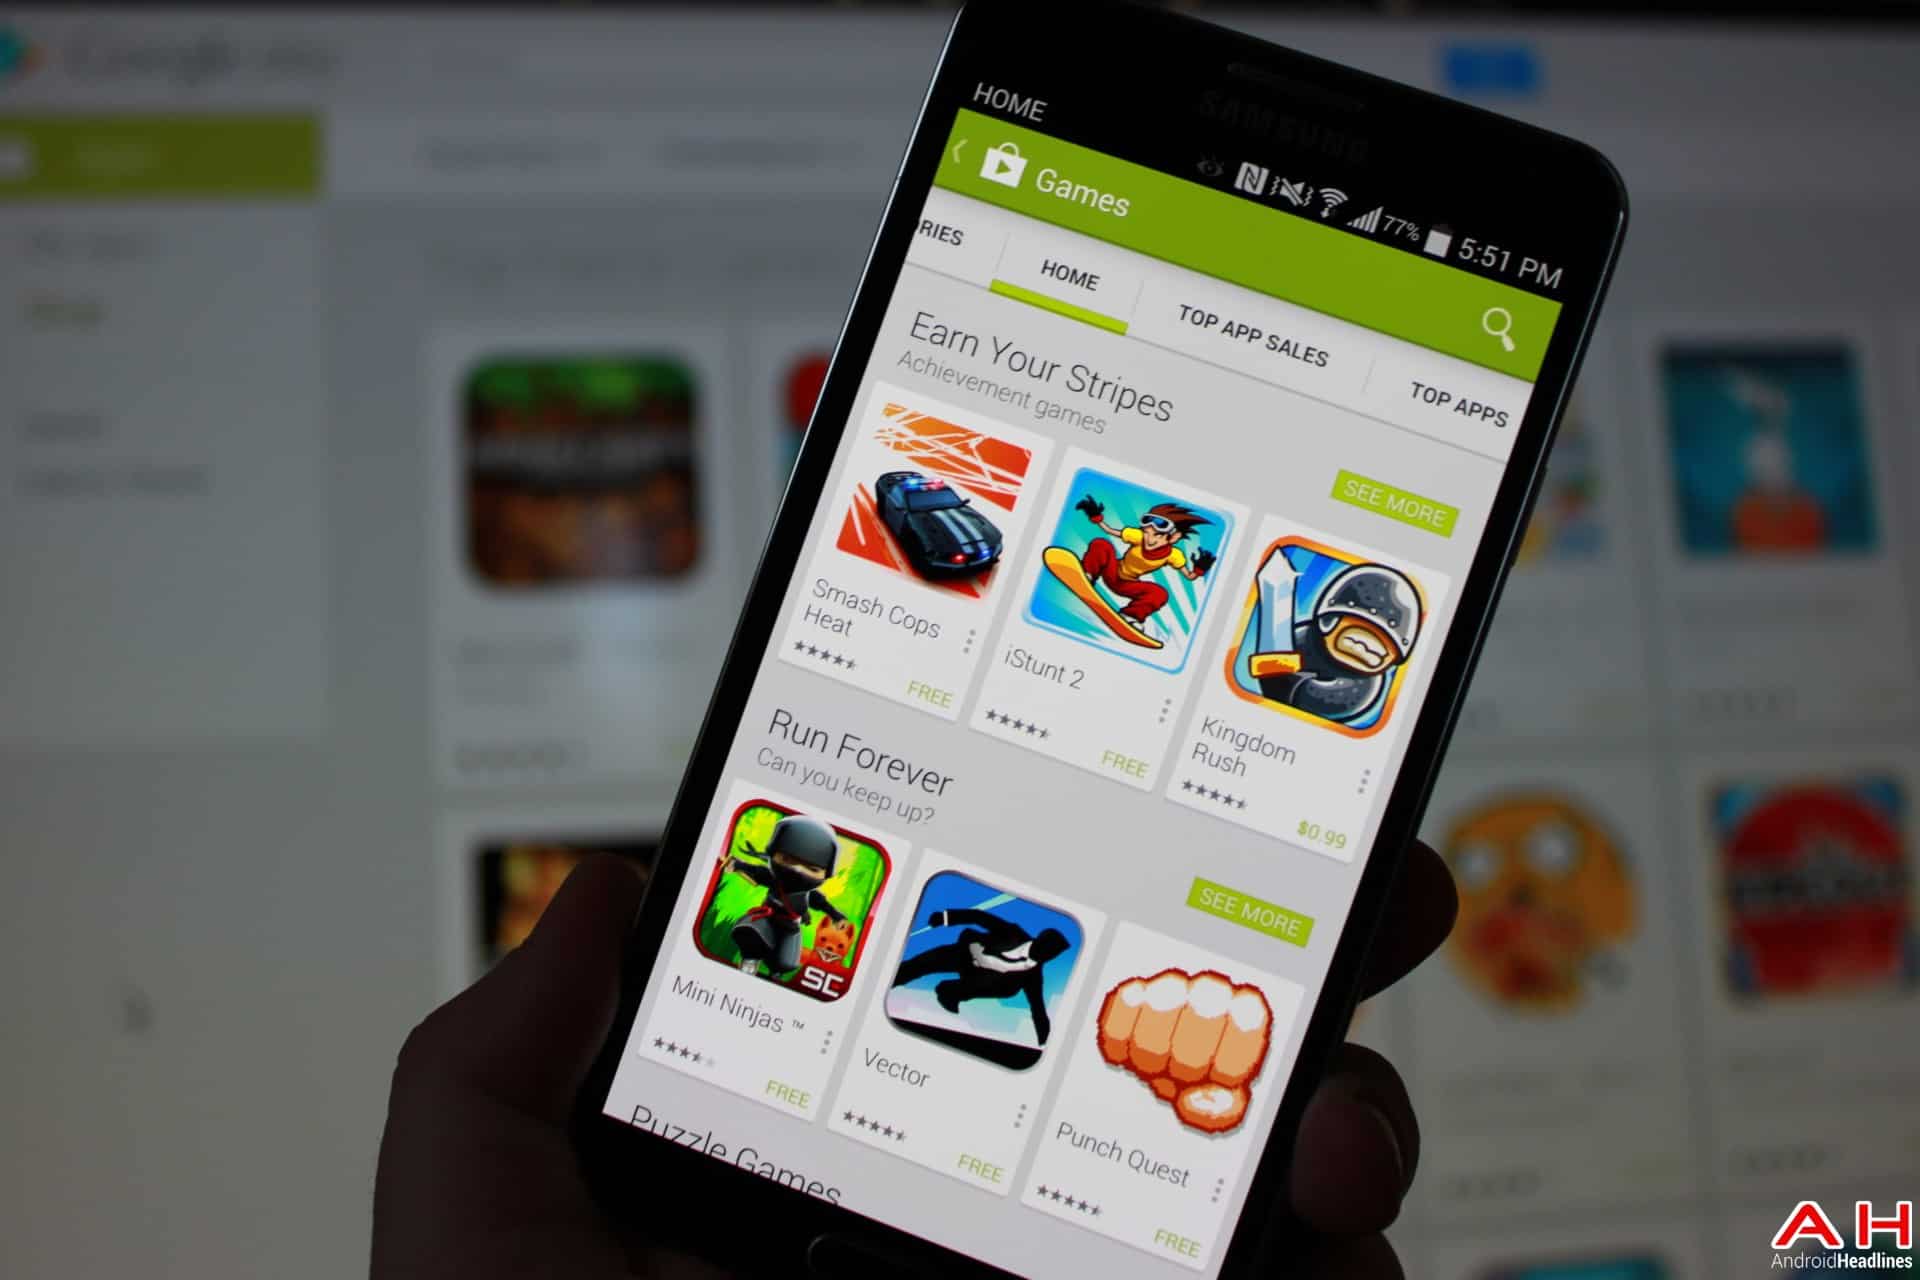 AH Google Play App Store Game of the week top 10 games android 1.4